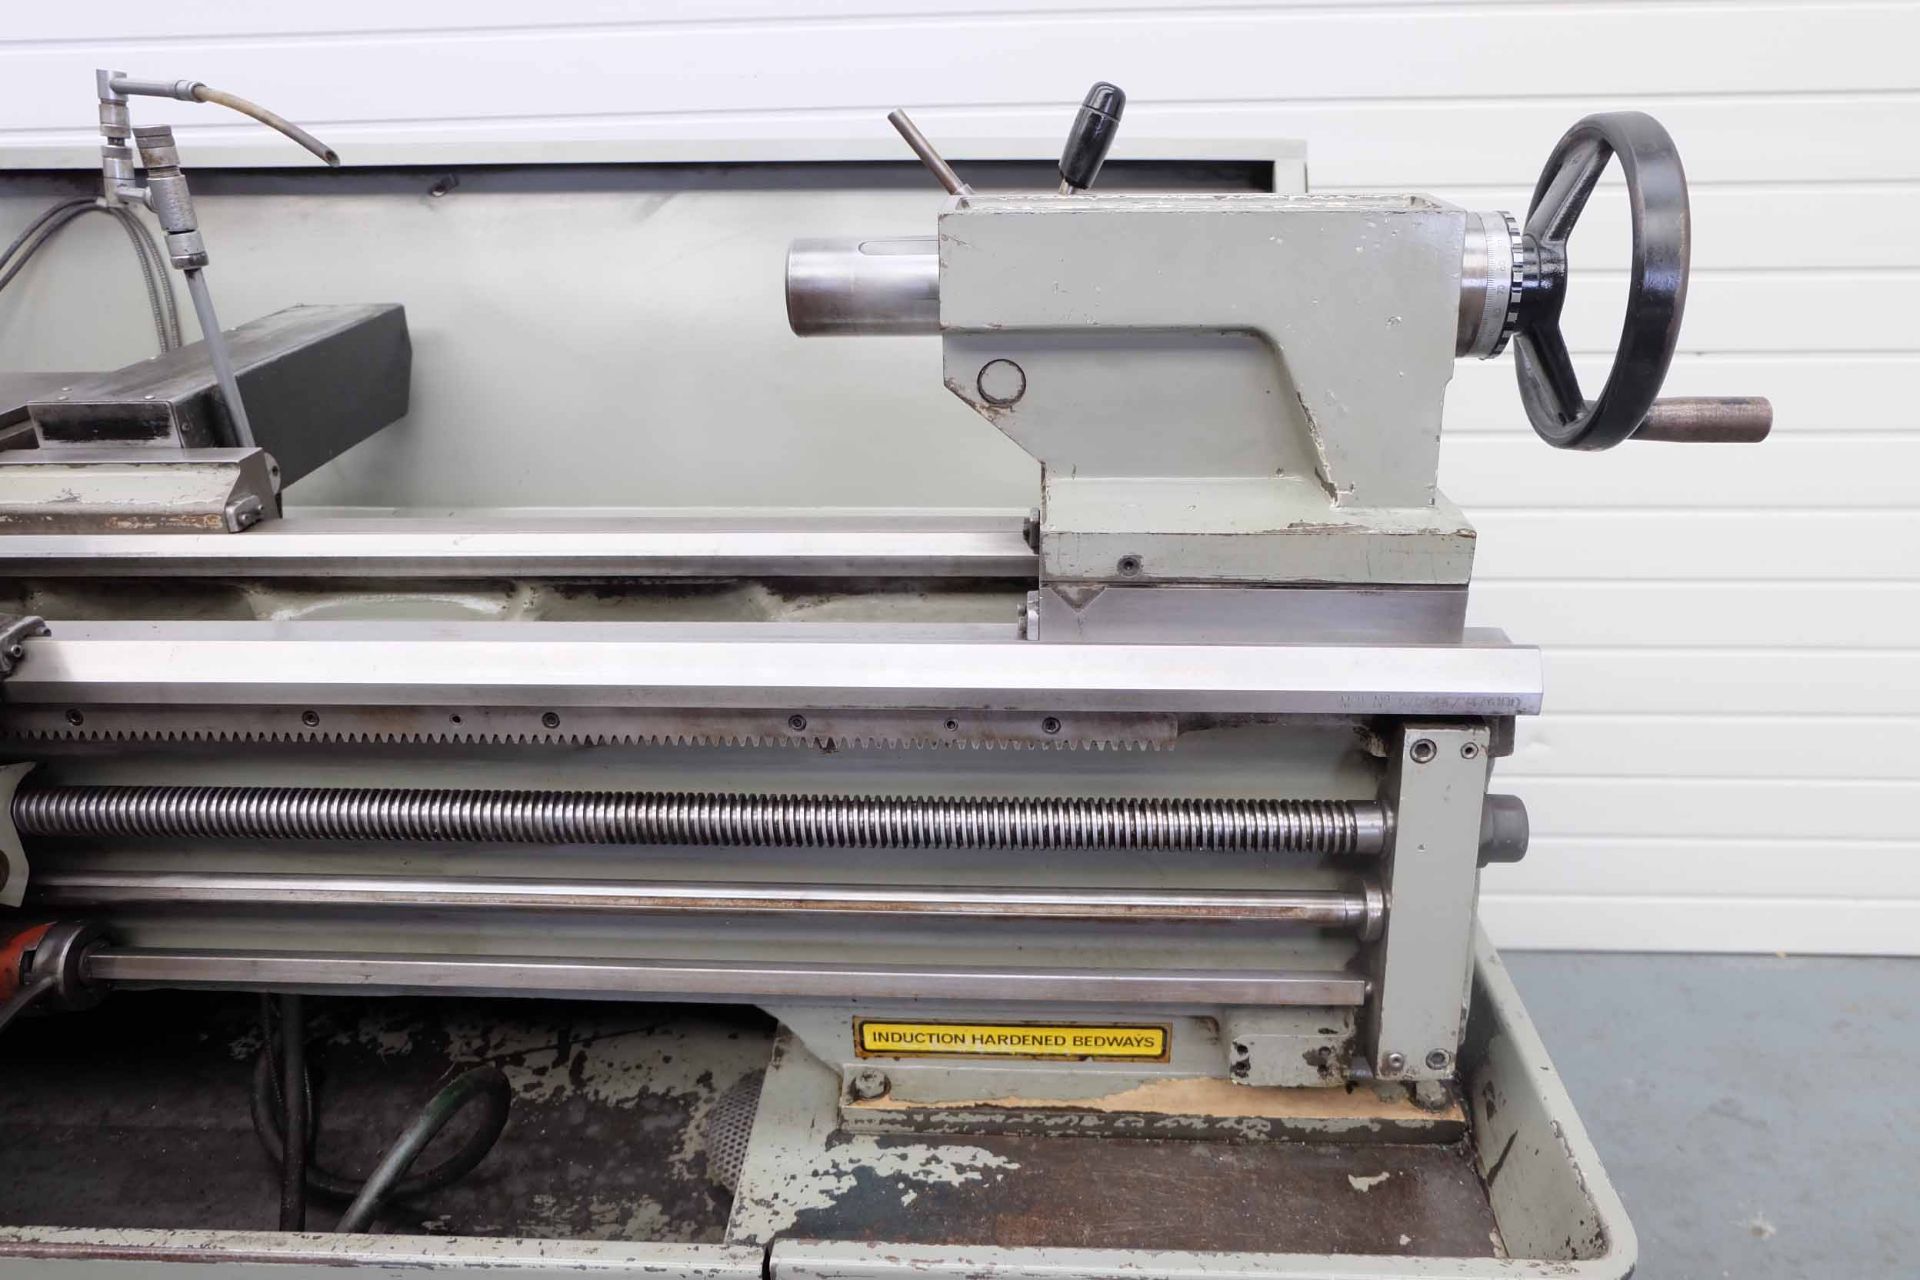 Colchester Triumph 2000 Gap Bed Centre Lathe. Admits Between Centres 50". Swing Over Bed 15 1/4". Sw - Image 8 of 10